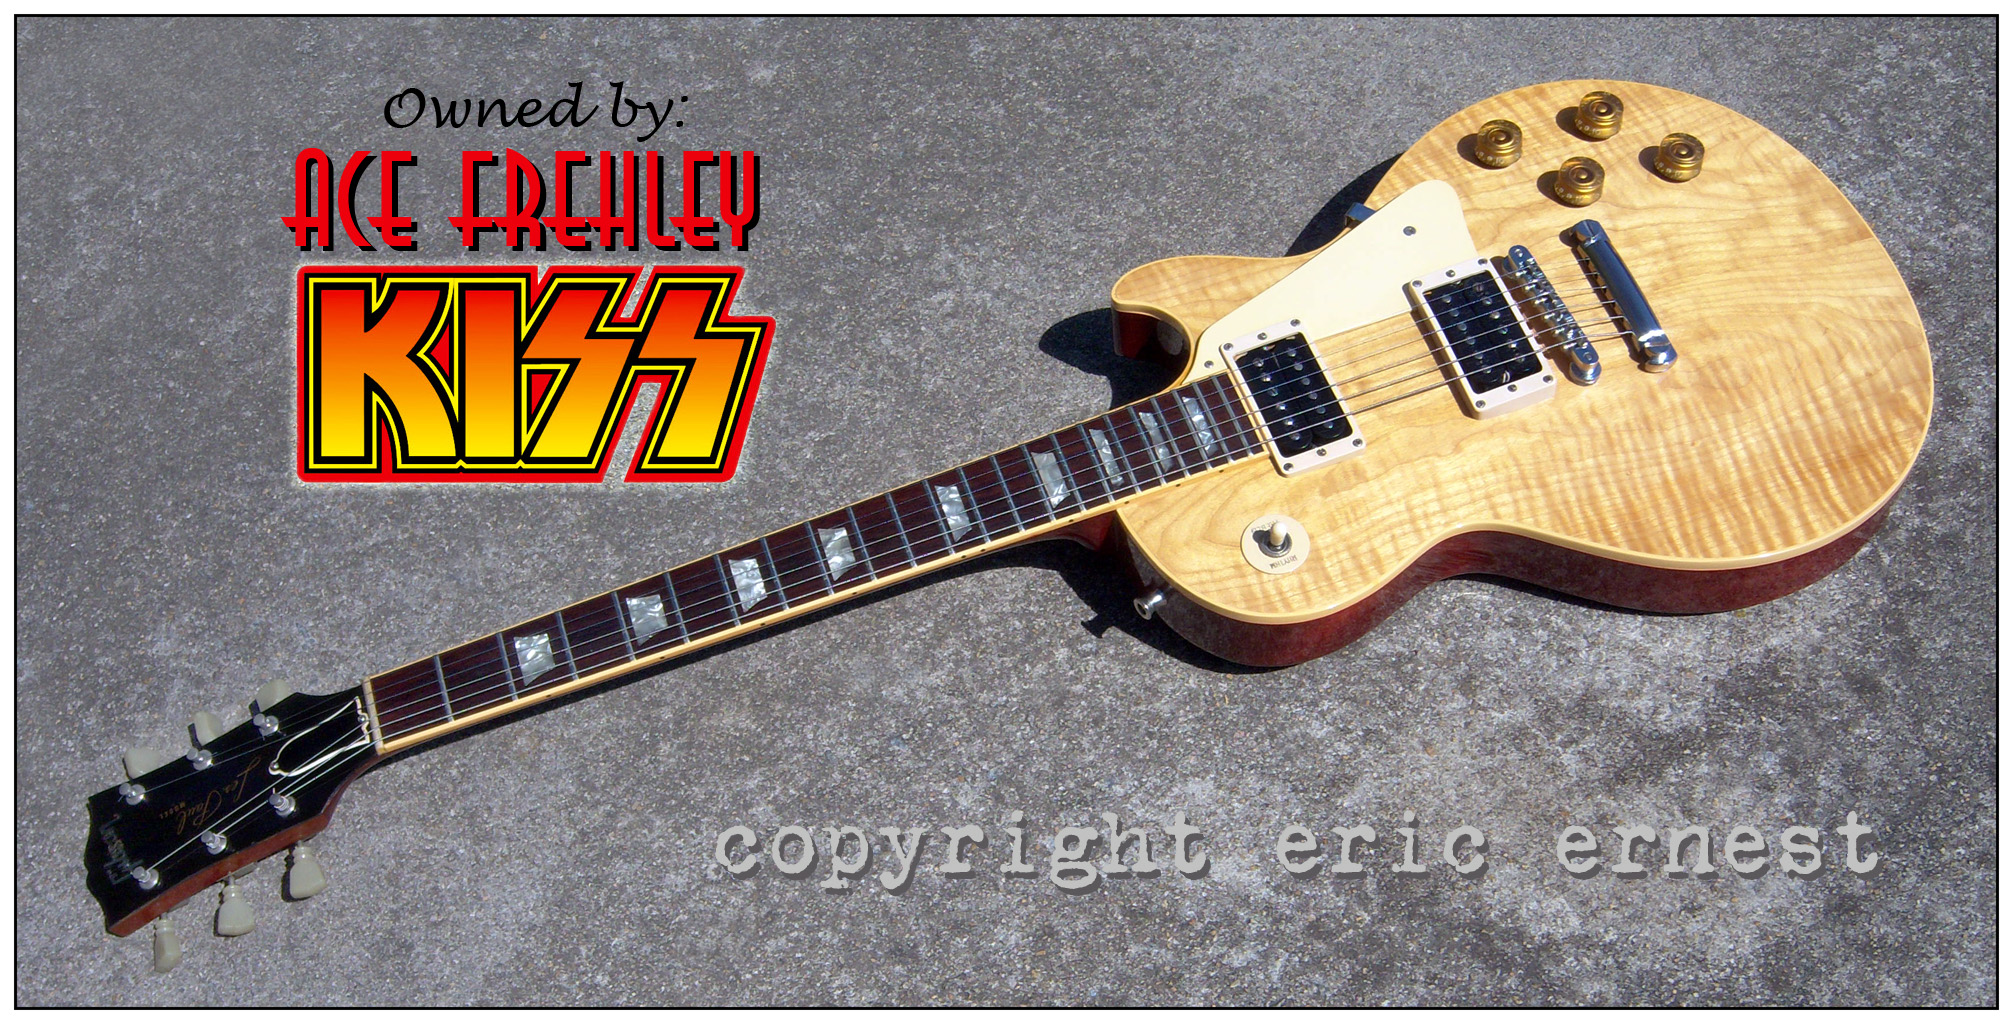 Ace Frehley of KISS | 1975 Gibson Les Paul Strings and Things guitar tour owned live collection